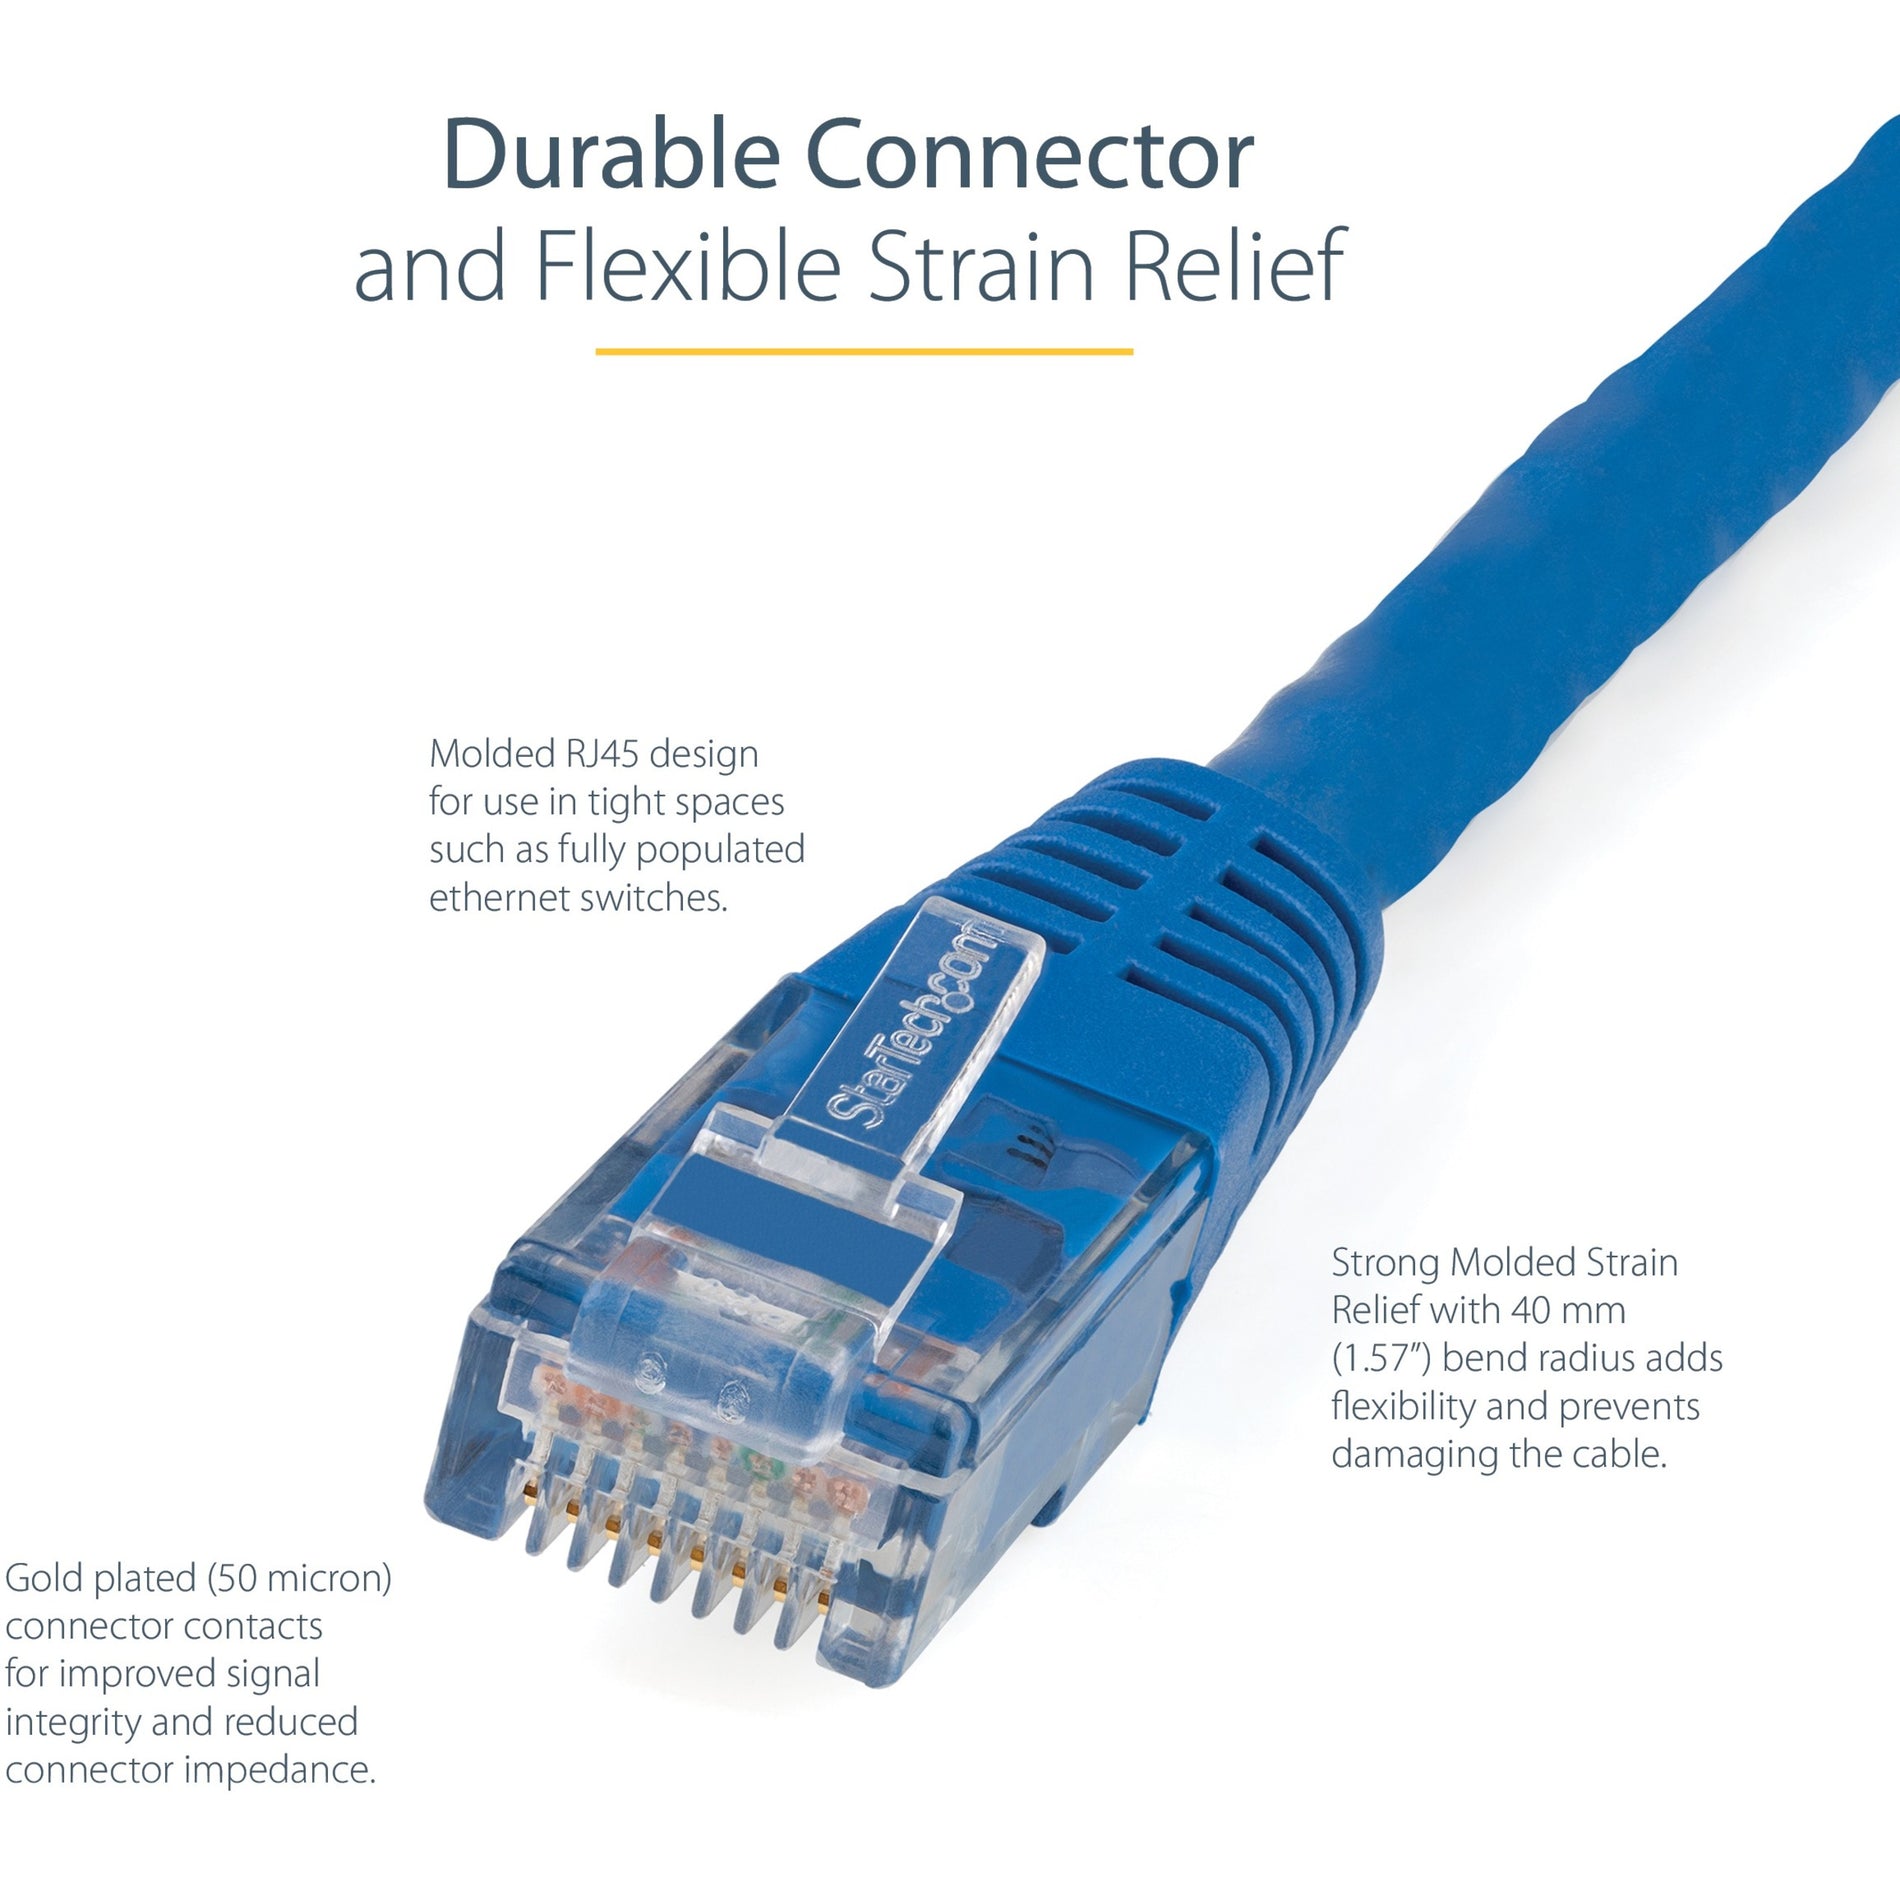 StarTech.com C6PATCH20BL 20ft Blue Molded Cat6 UTP Patch Cable 10 Gbit/s Data Transfer Rate PoE+ Compatible  スタートック・ドットコム C6PATCH20BL 20フィート 青 製成キャット6 UTPパッチケーブル、10ギガビット/秒 データ転送速度、PoE+ 対応